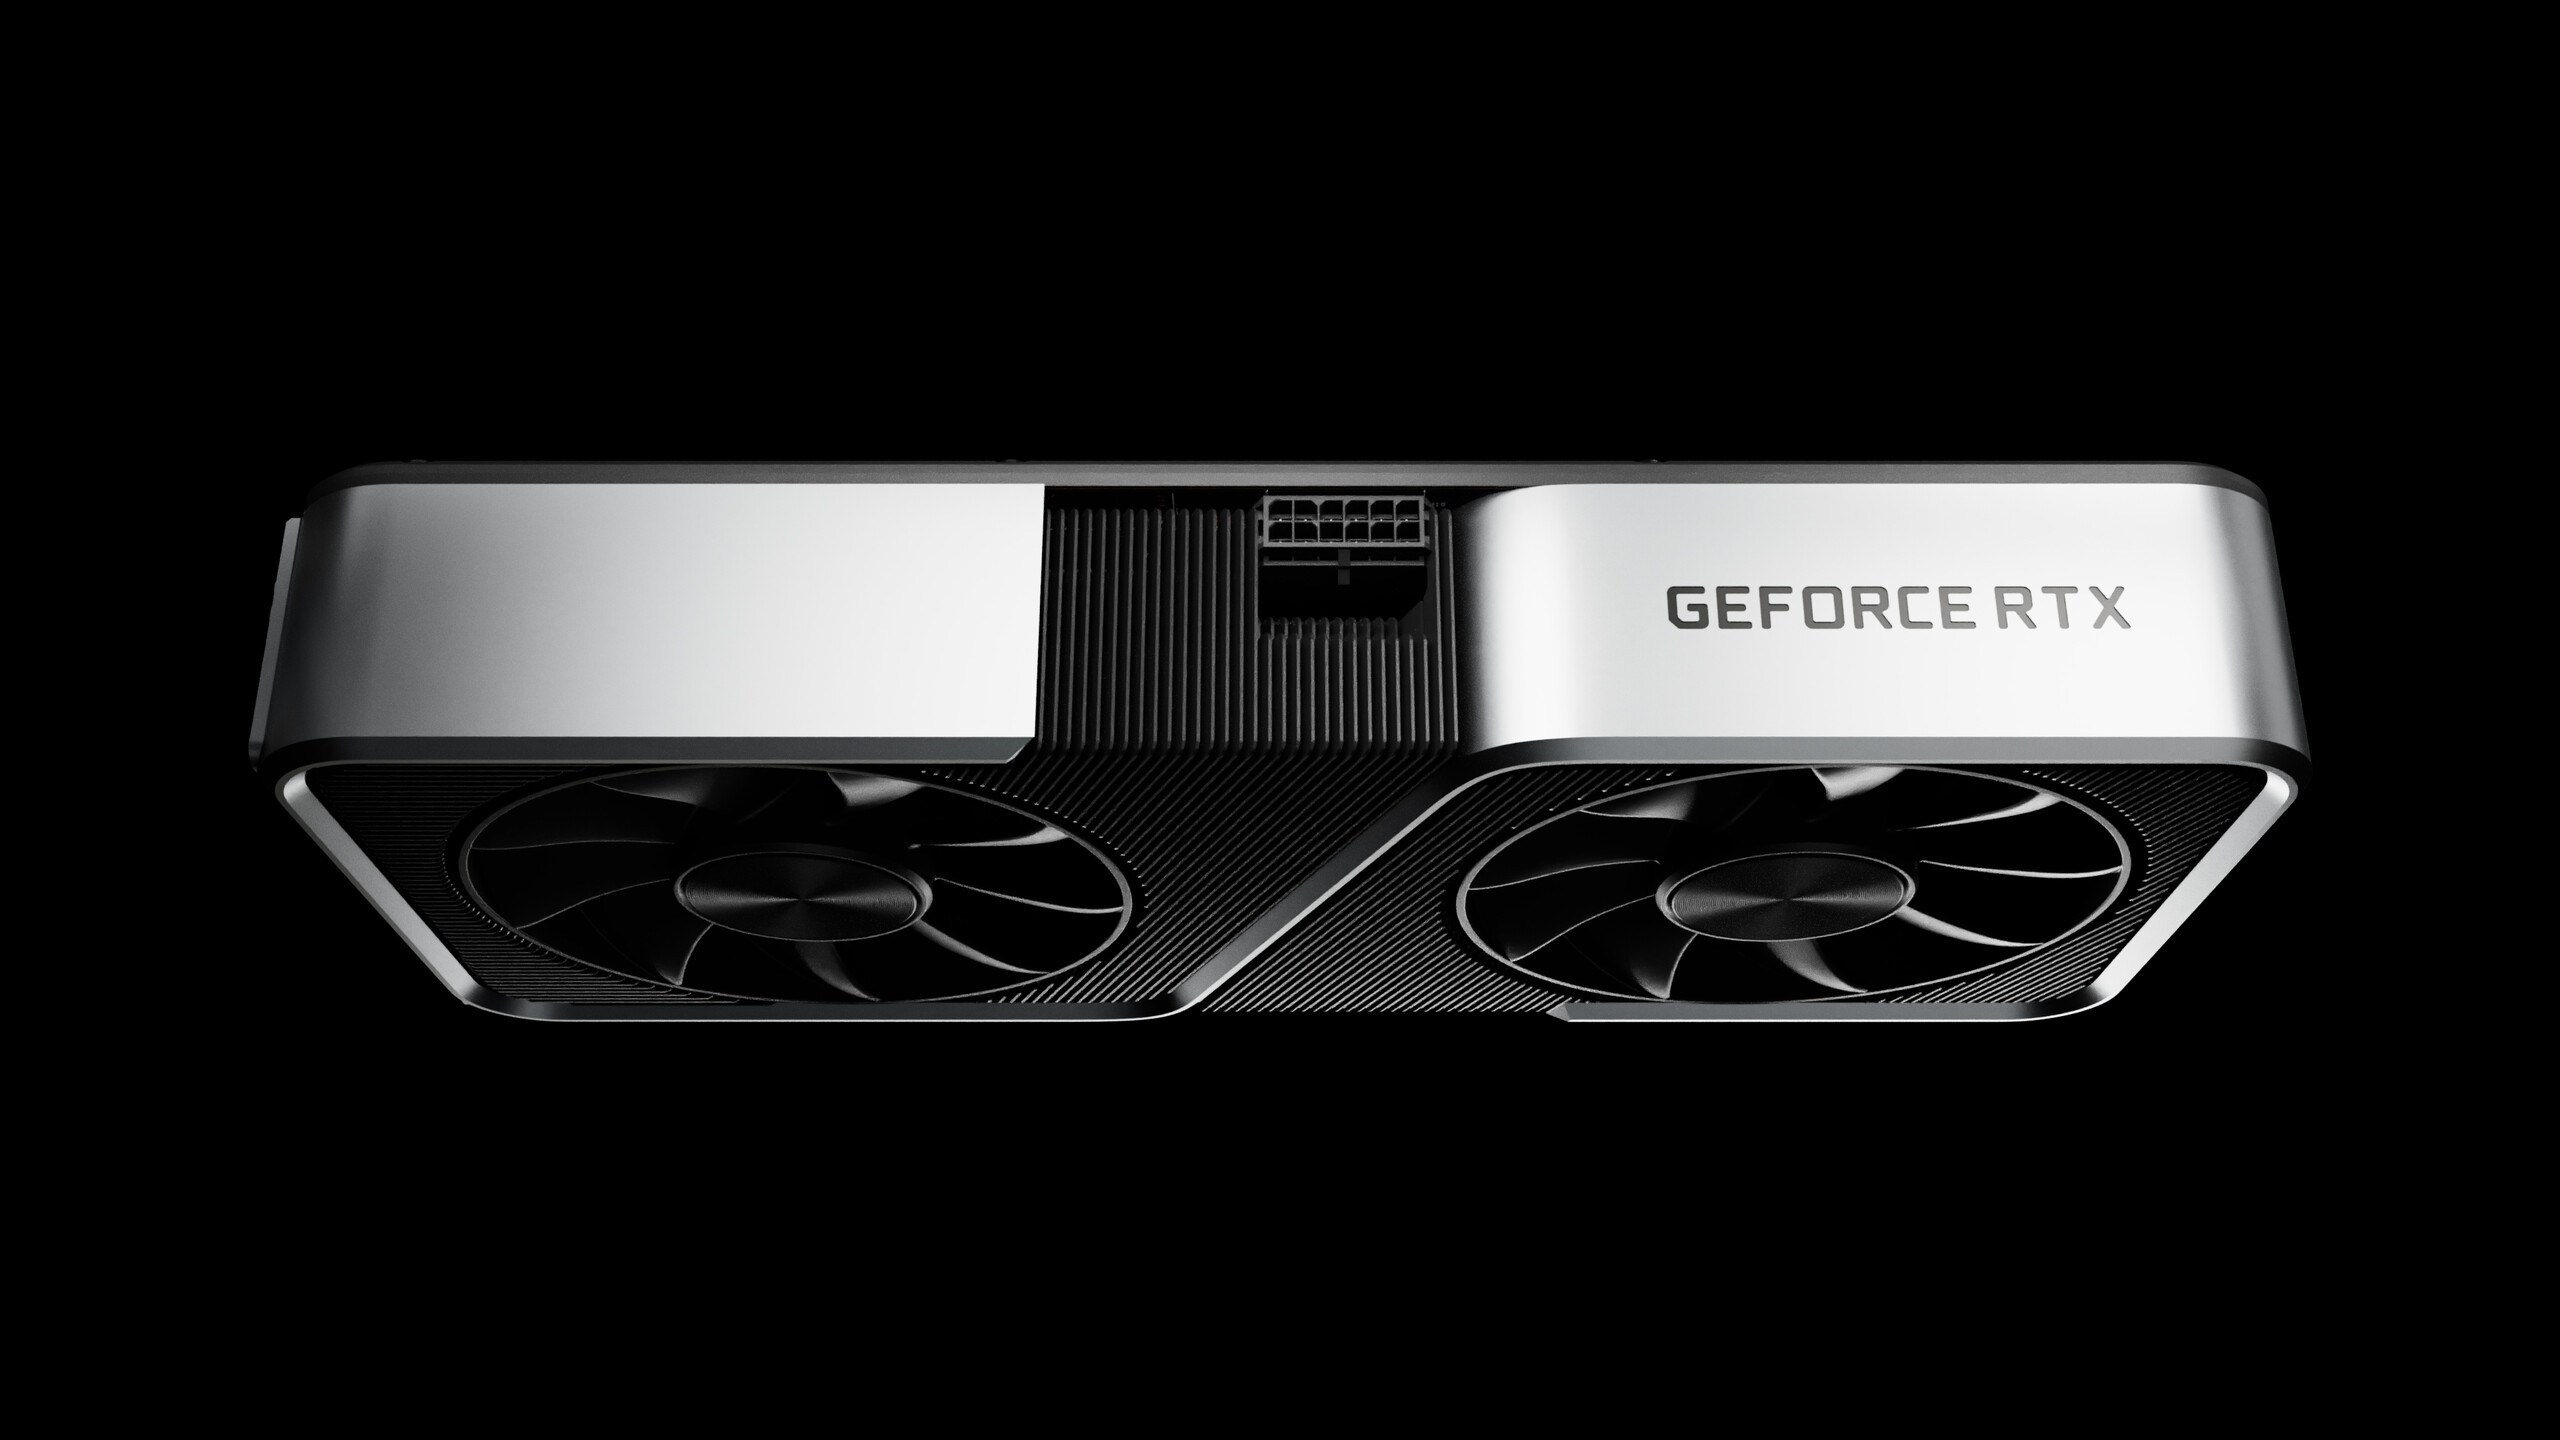 Geekbench Leak Suggests NVIDIA GeForce RTX 4060 Nearly 20% Faster than RTX  3060